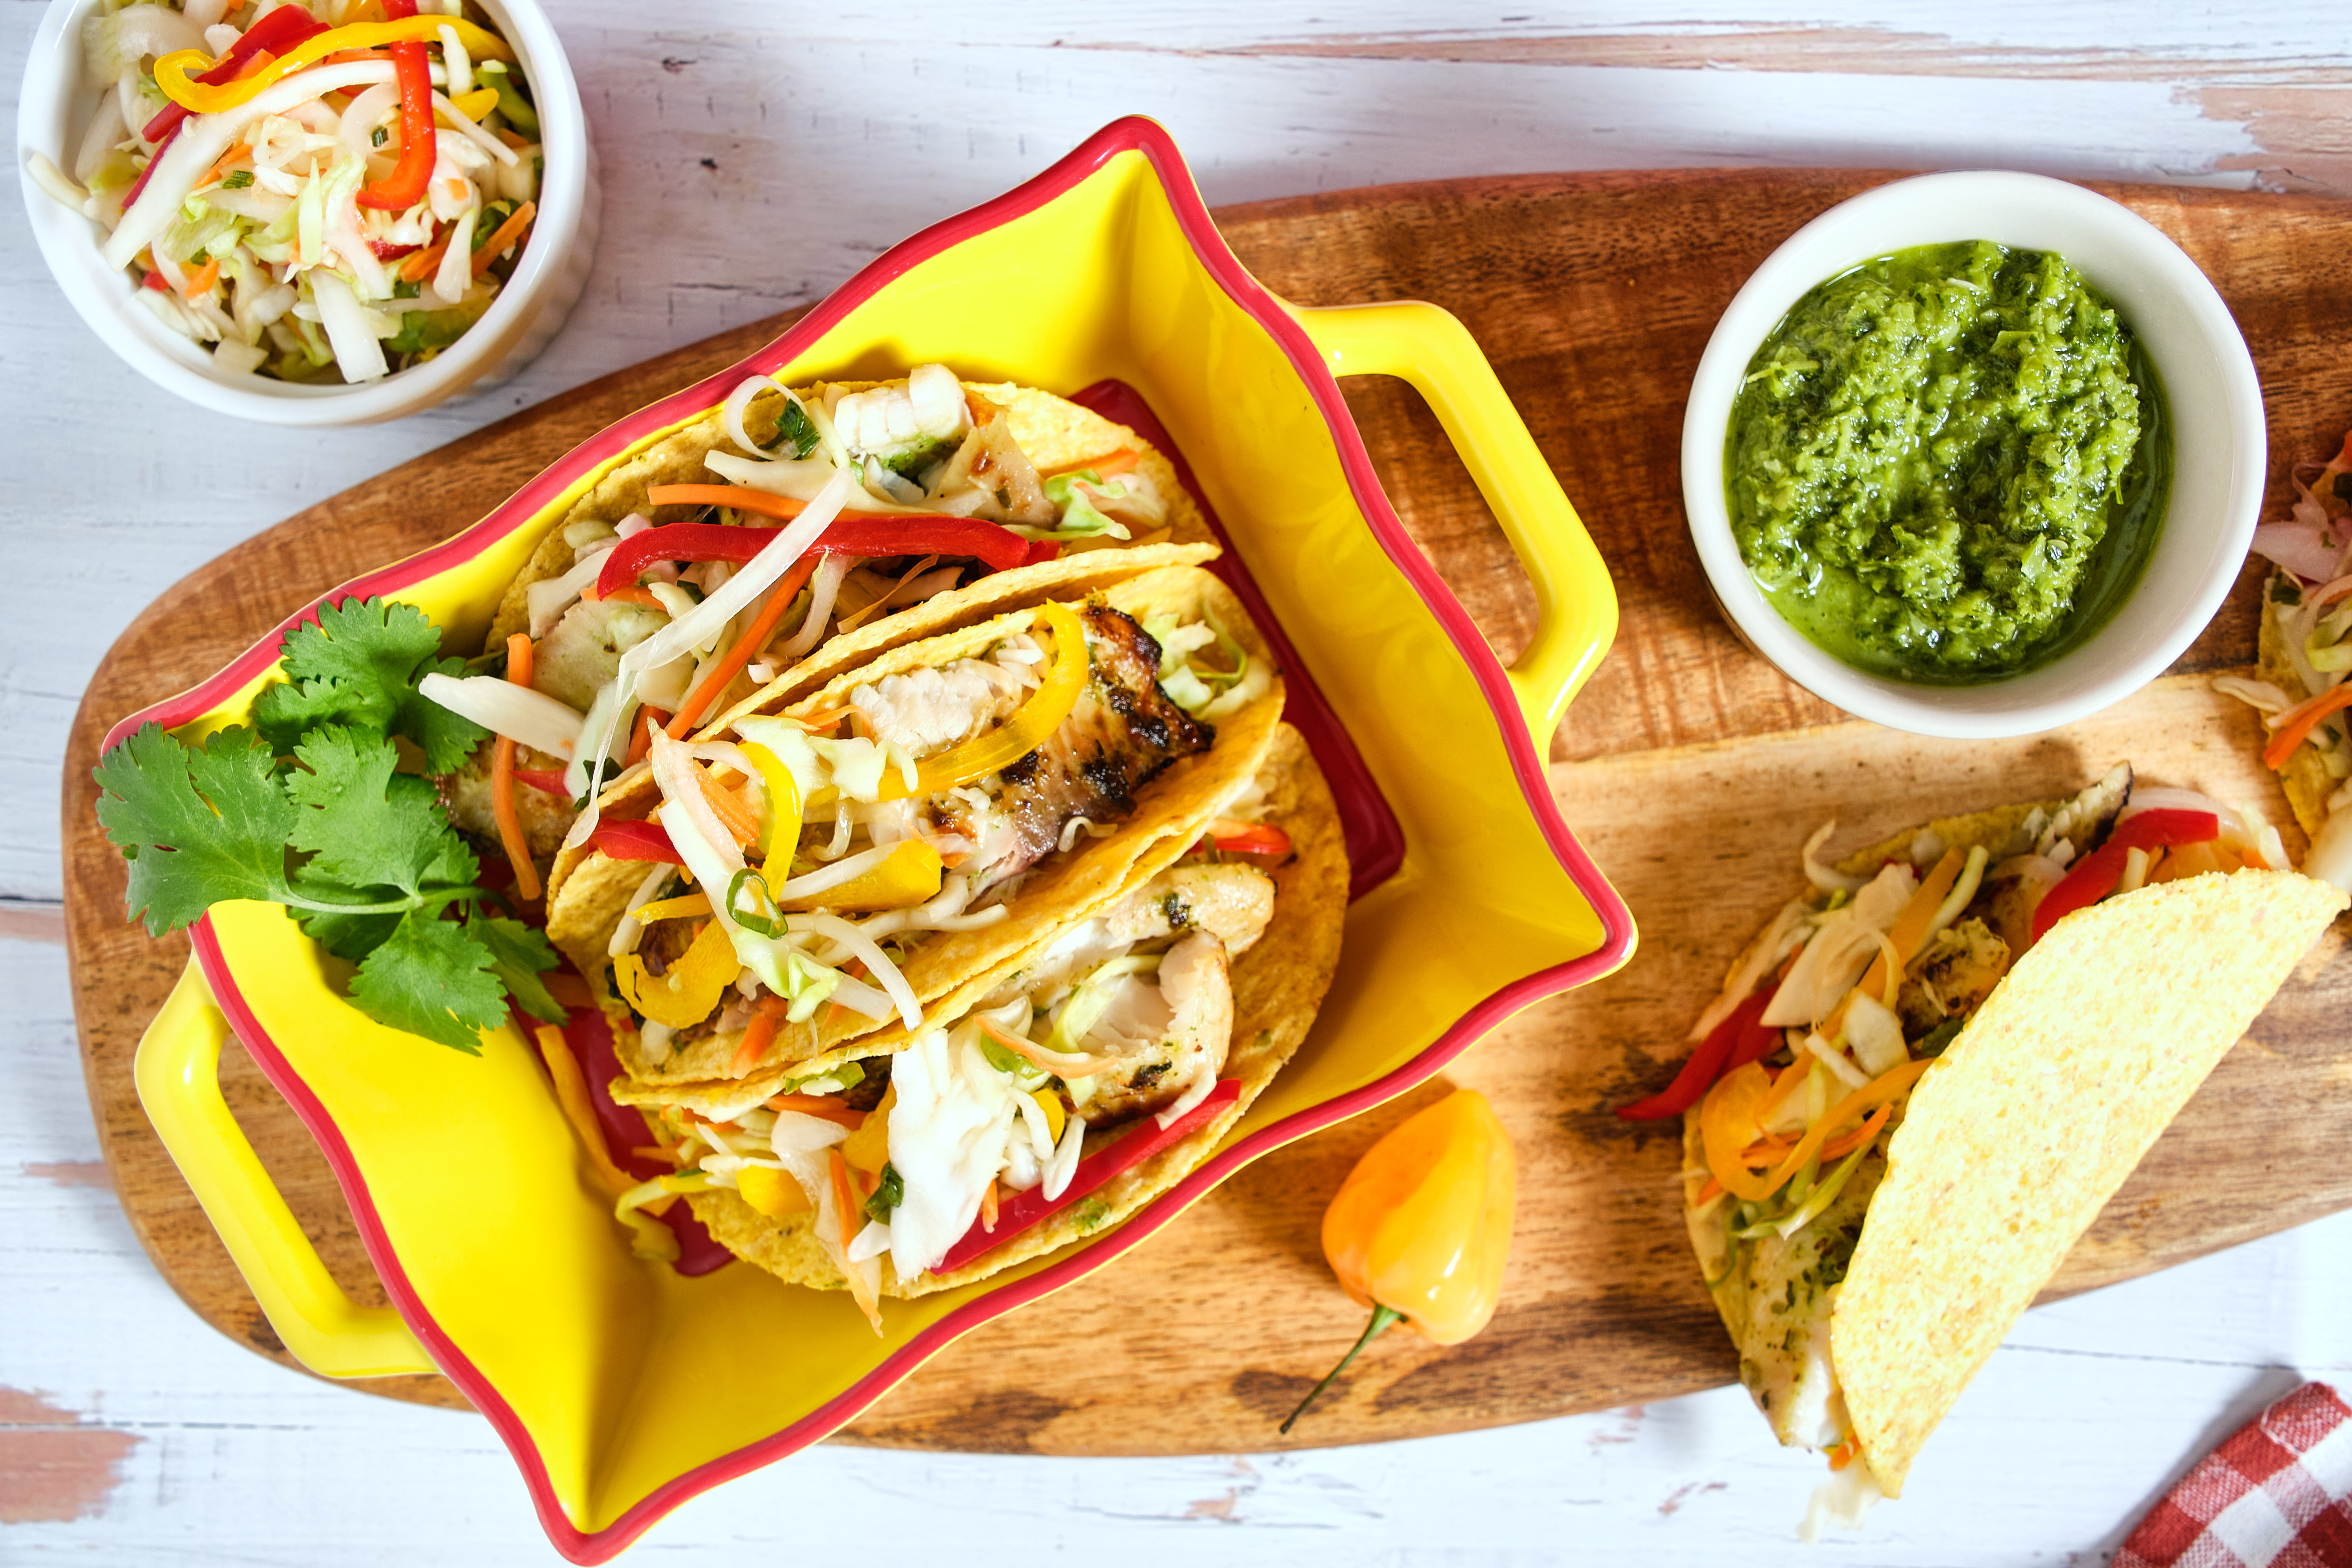 A plate of fish tacos on a wooden cutting board, served with bowls of pikliz and epi salsa